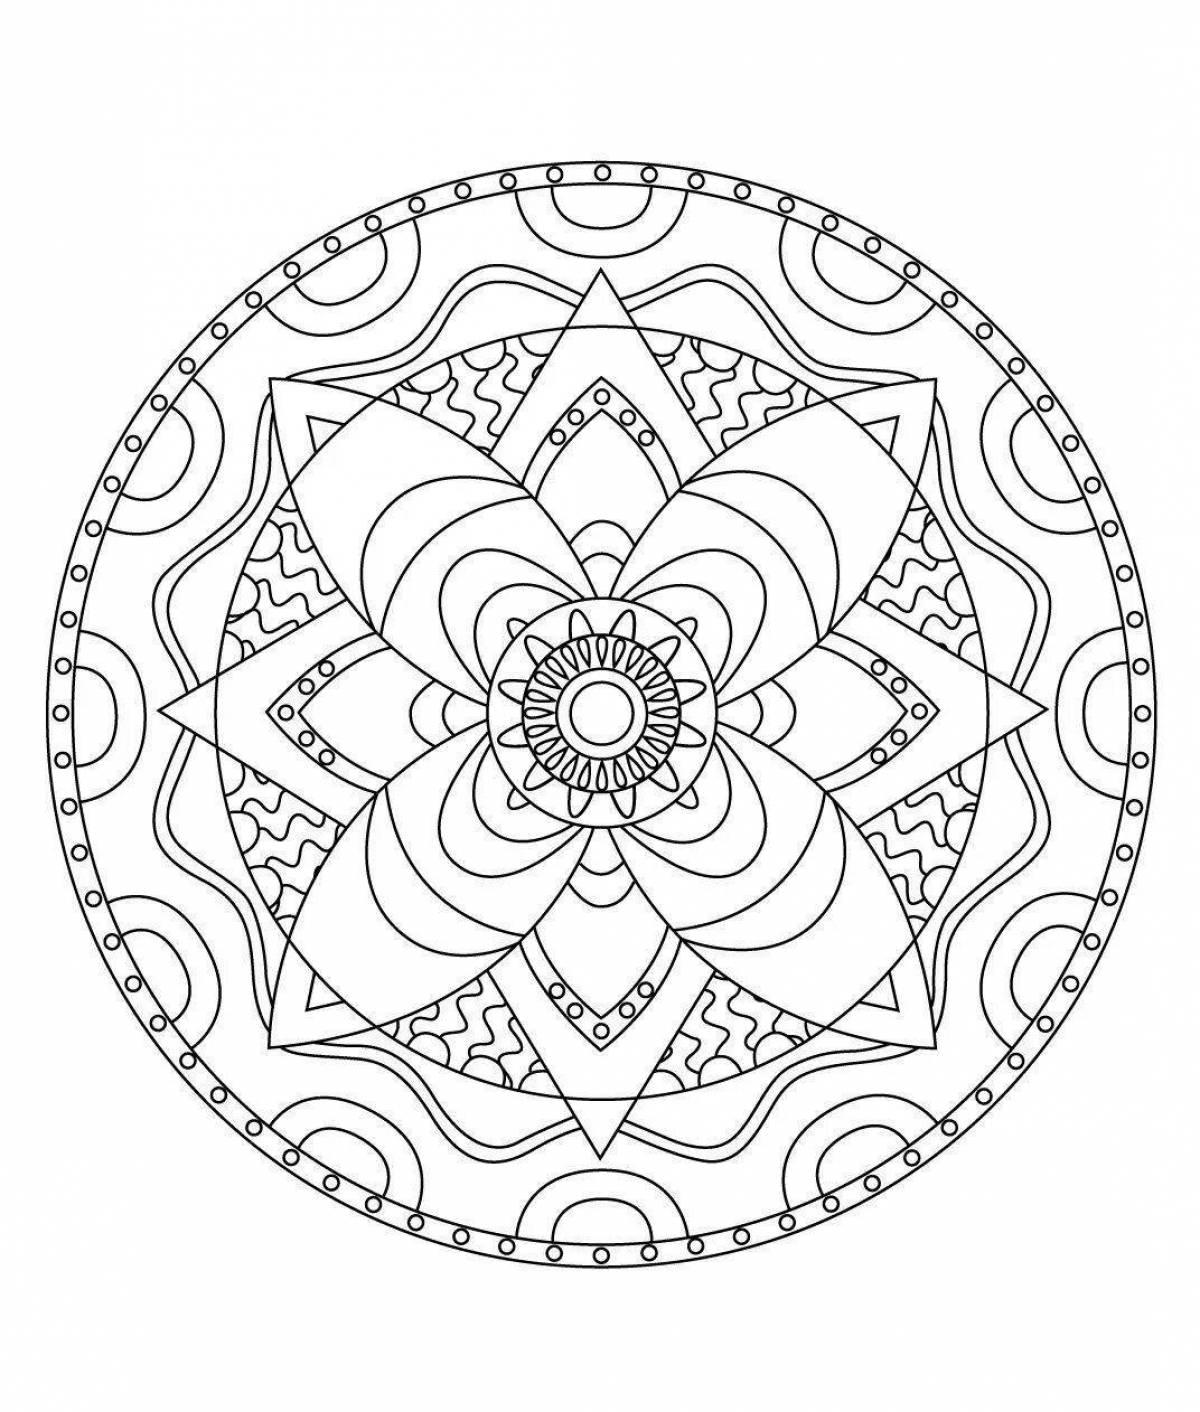 Amazing mantra coloring pages